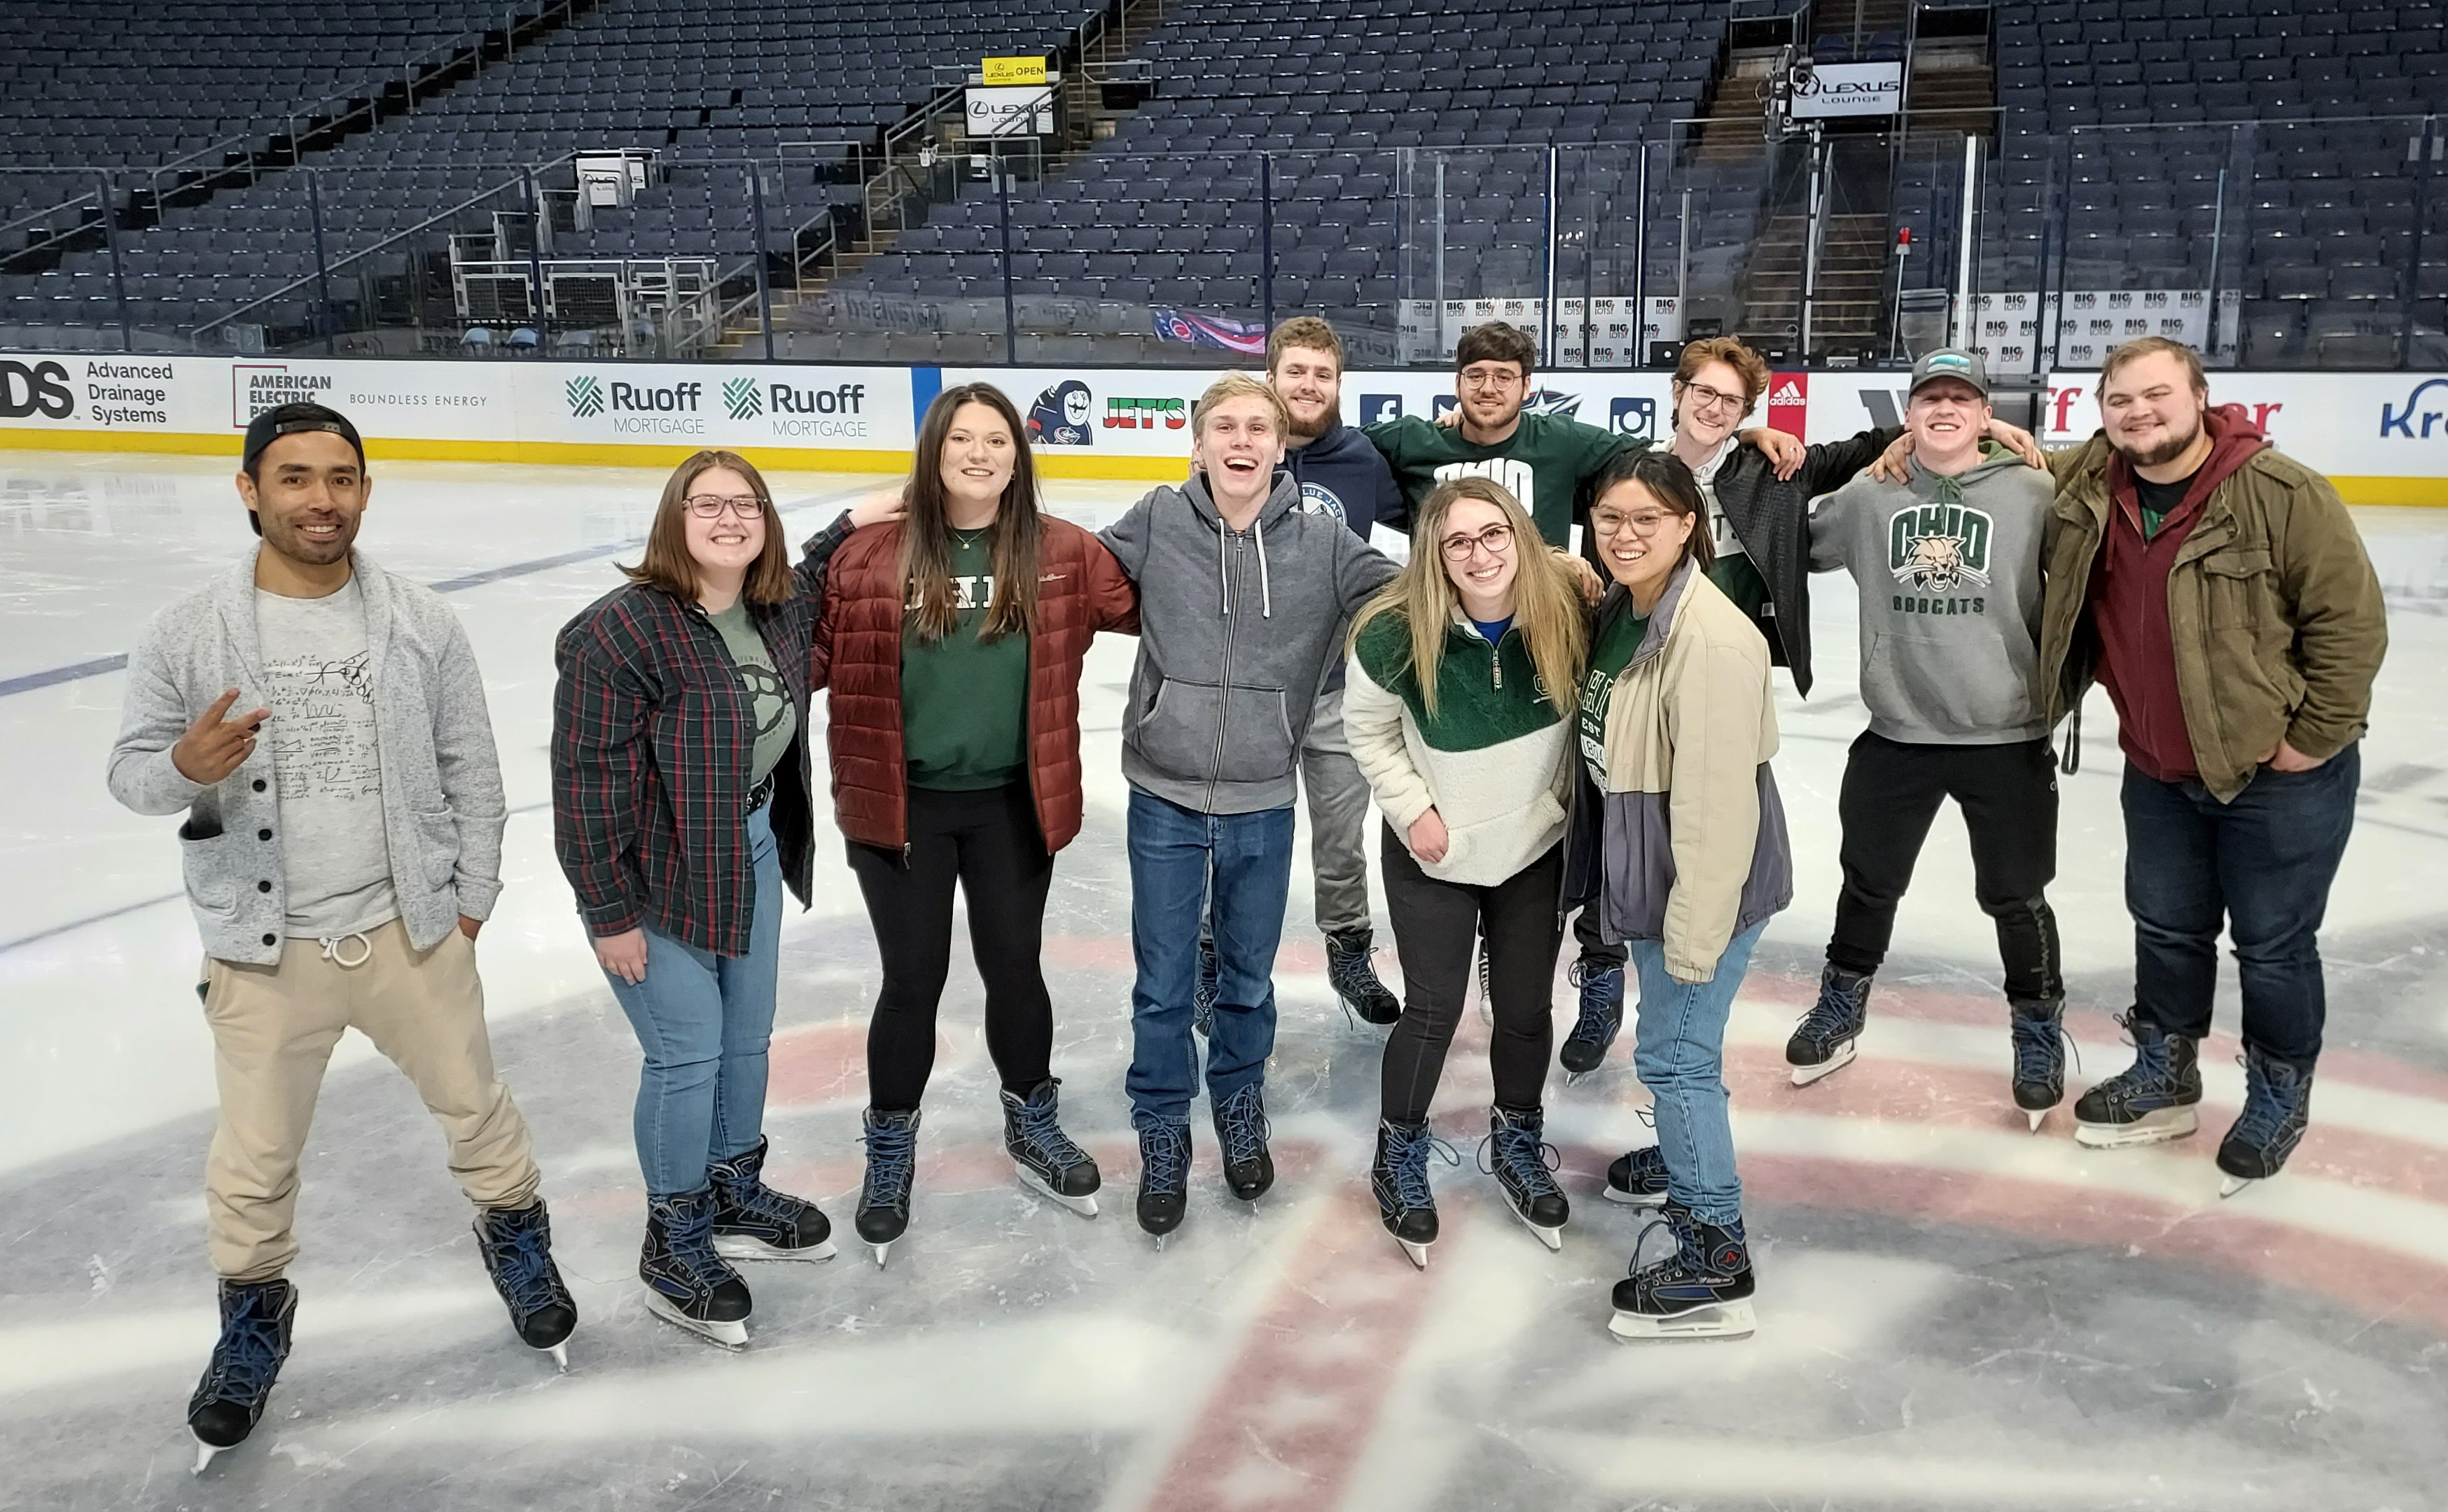 OHIO students are shown on the ice at Nationwide Arena